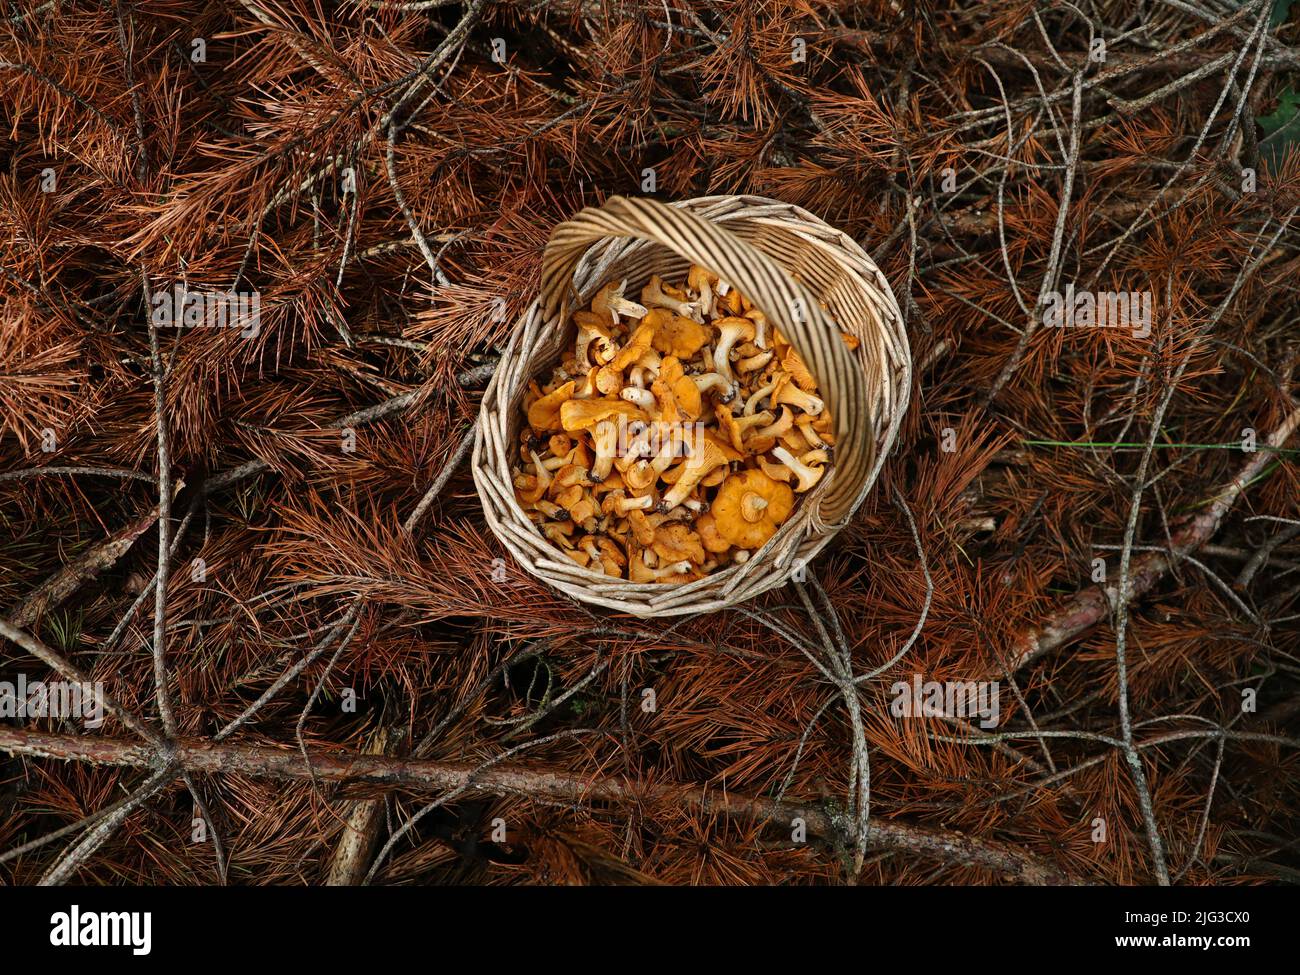 Mushroom picking is perfect in these corona times. In addition, many mushroom experts predict that it will be a good mushroom year this year. Here a filled mushroom basket with chanterelles (Cantharellus cibarius) from the forests outside Borensberg, Sweden. Stock Photo